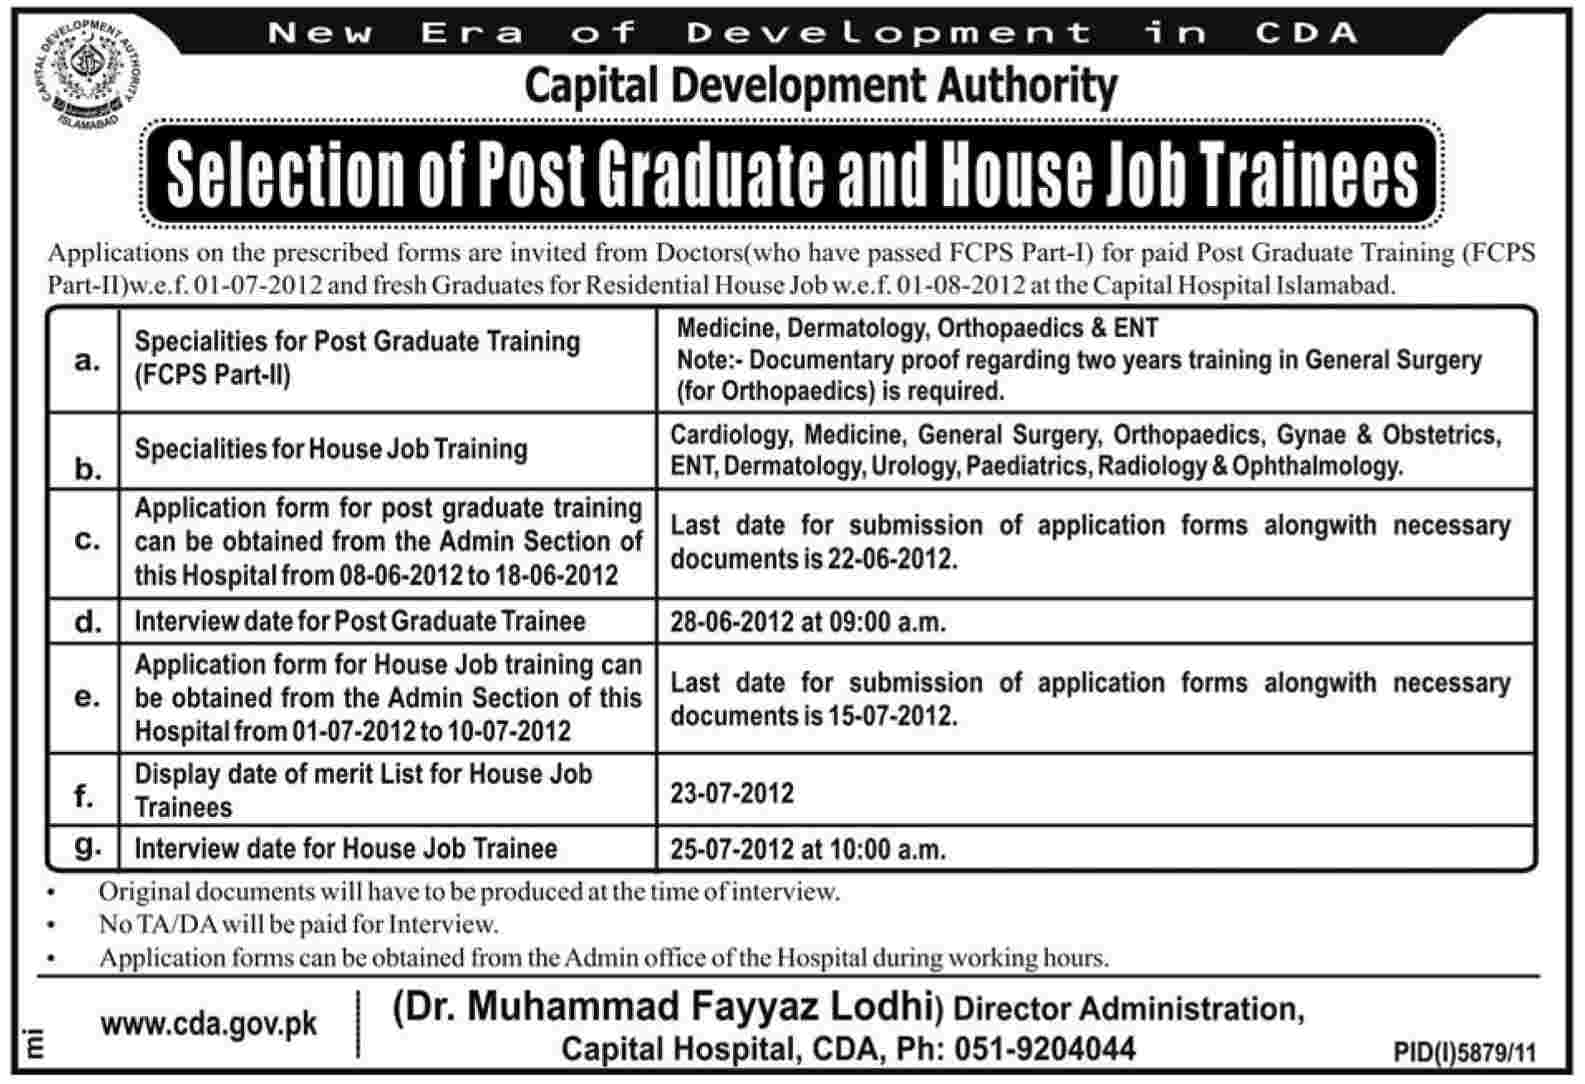 Post Graduate and House Job Trainees Required by Capital Development Authority (CDA)